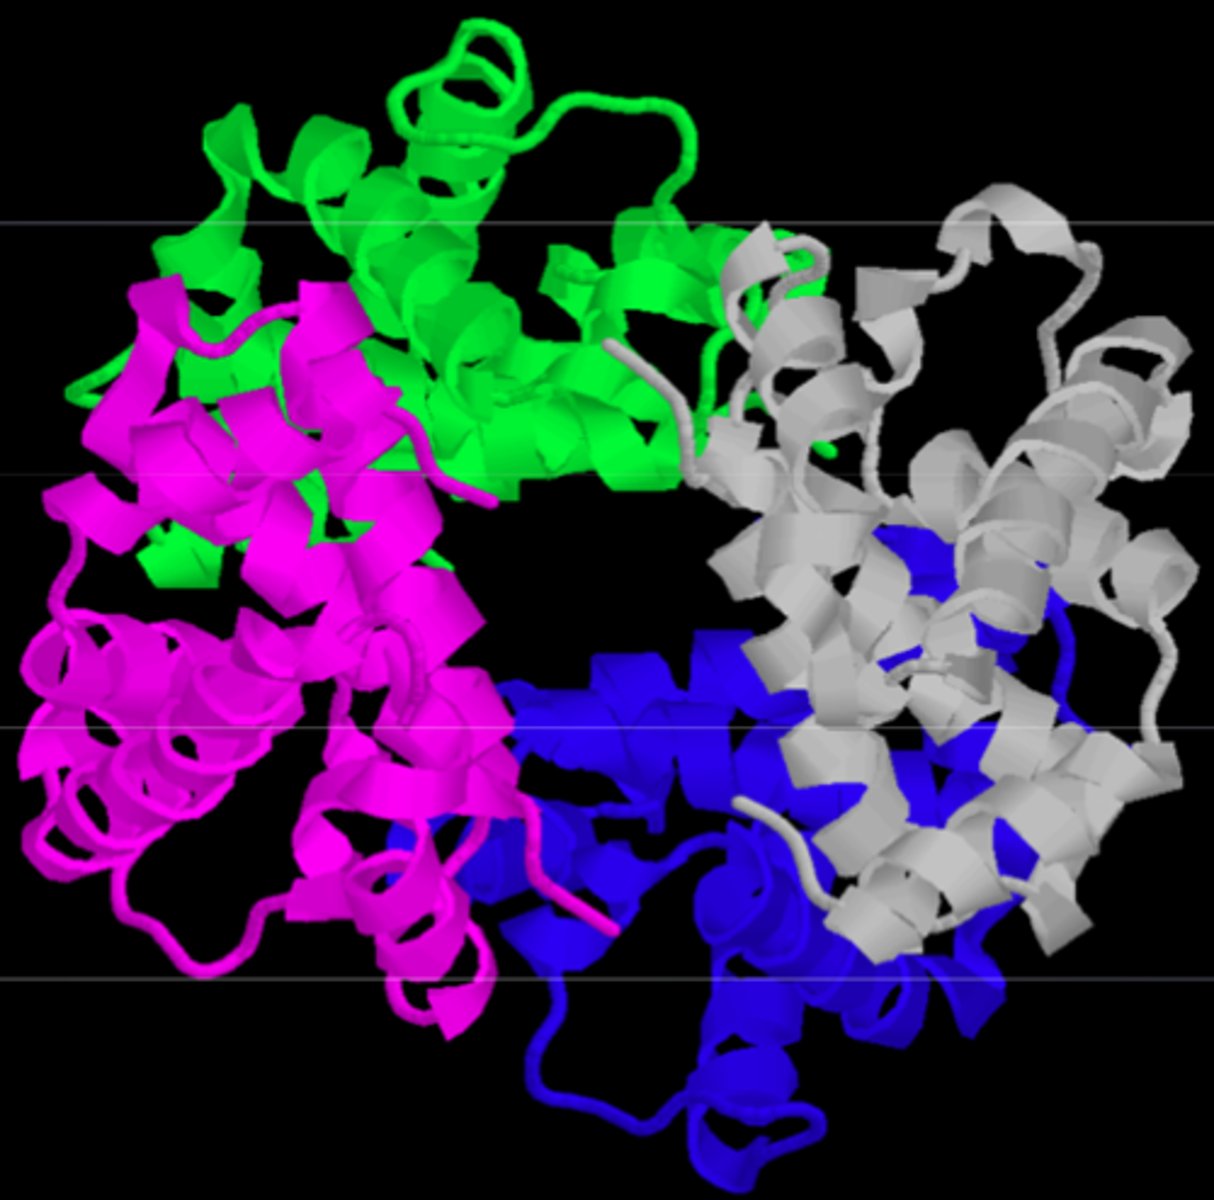 <p>- final functional form of a protein: the interaction of multiple subunits</p><p>- the final protein may be a repeat of a single polypeptide subunit or an assembly of different subunits</p>